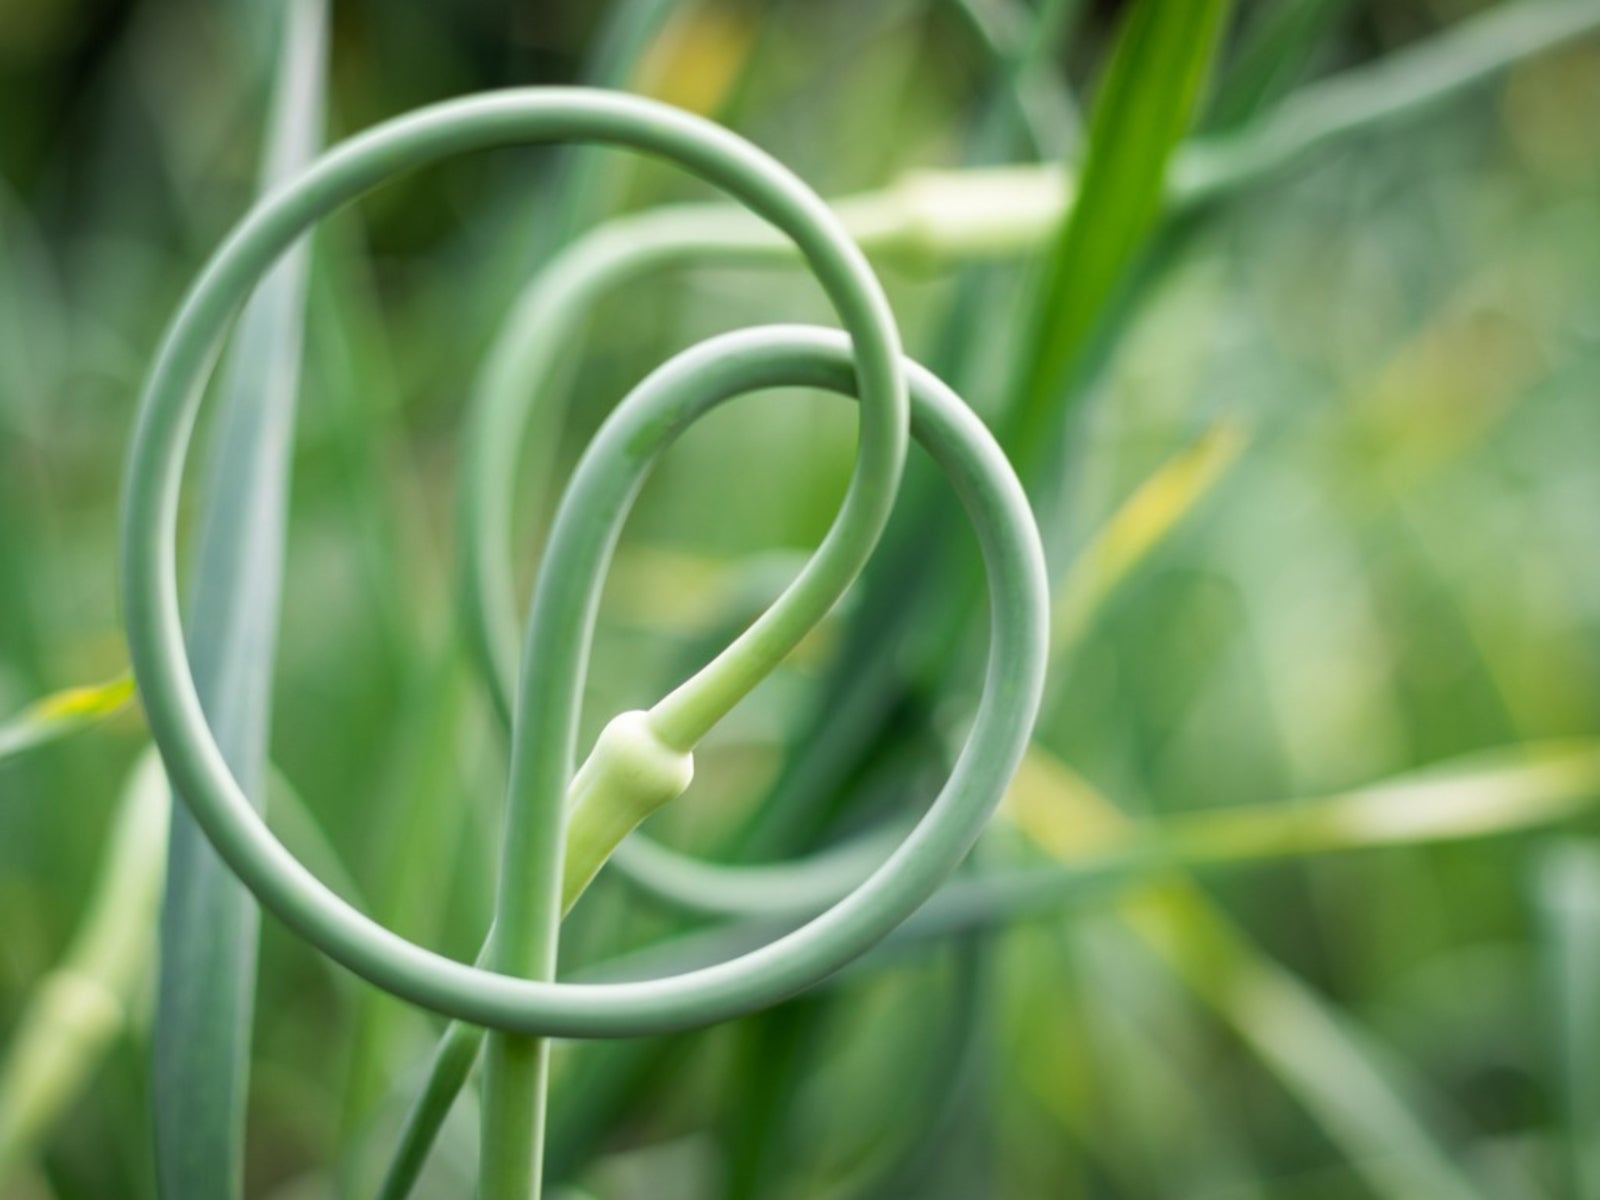 Growing Garlic Scapes: What Is A Garlic Scape And How To Harvest Them